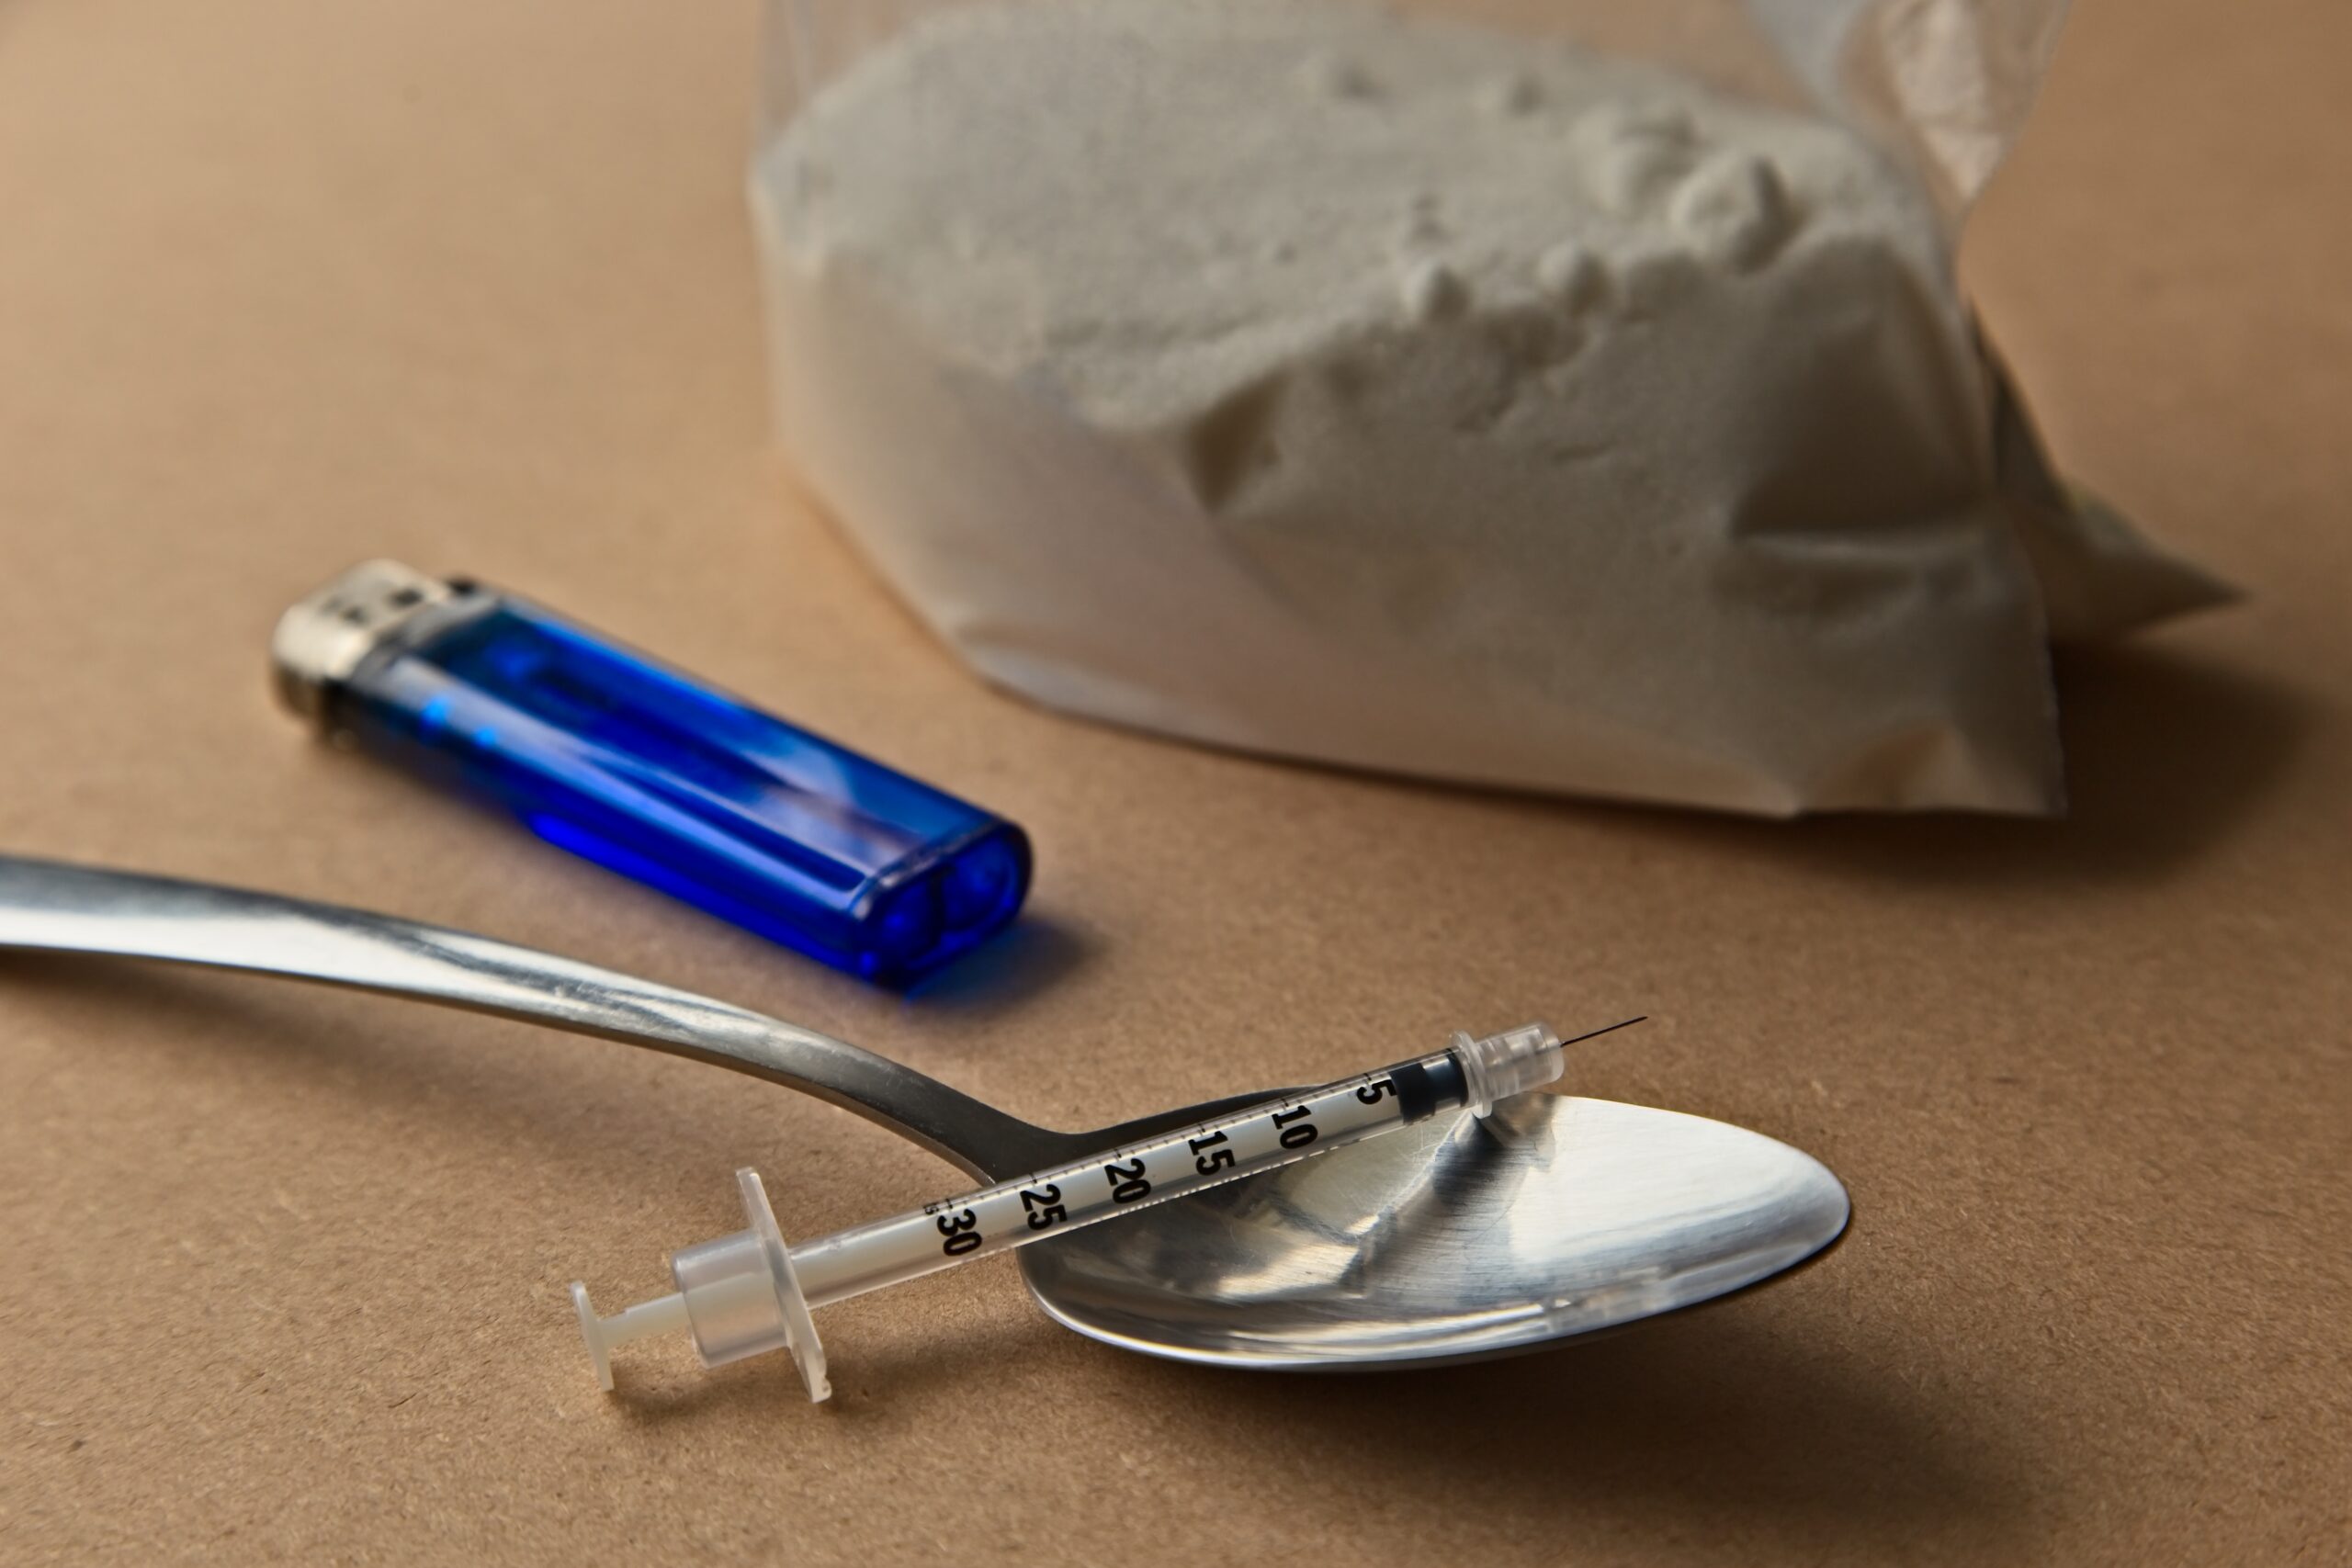 Drug abuse concept image consisting of a spoon, syringe, lighter and a bag of heroin.